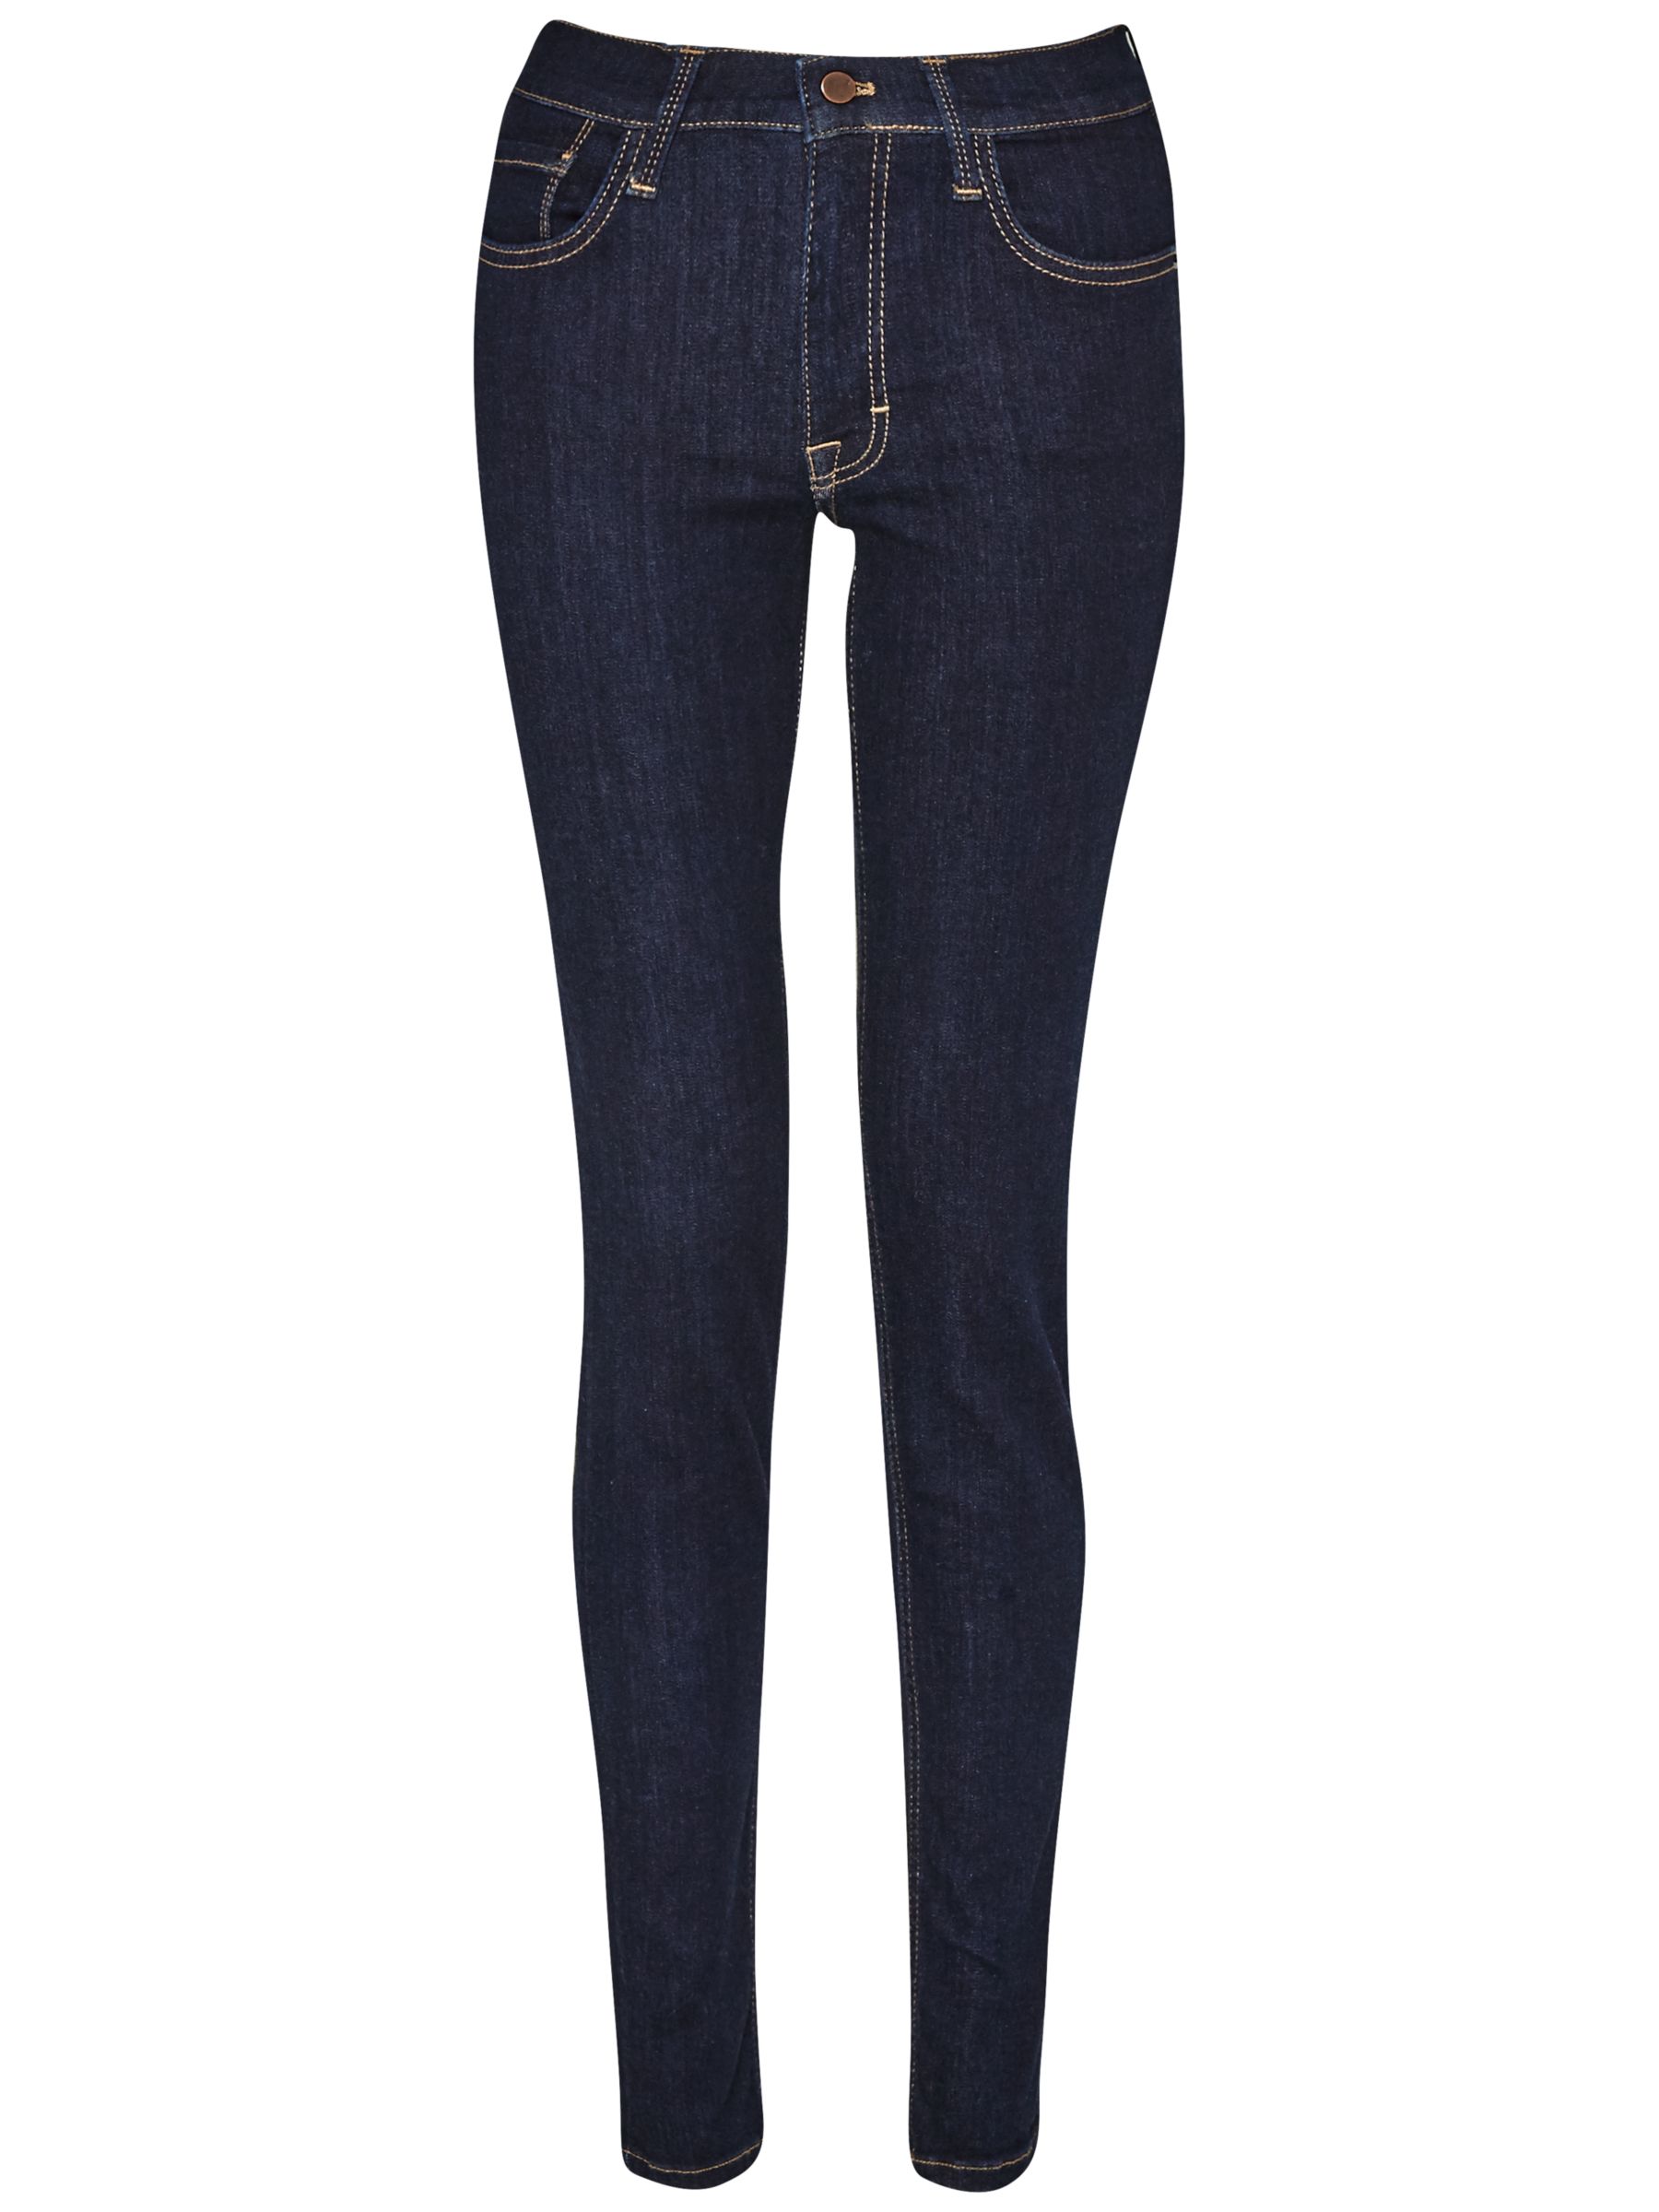 French Connection Skinny Stretch Rebound Denim Jeans, Rinse at John ...